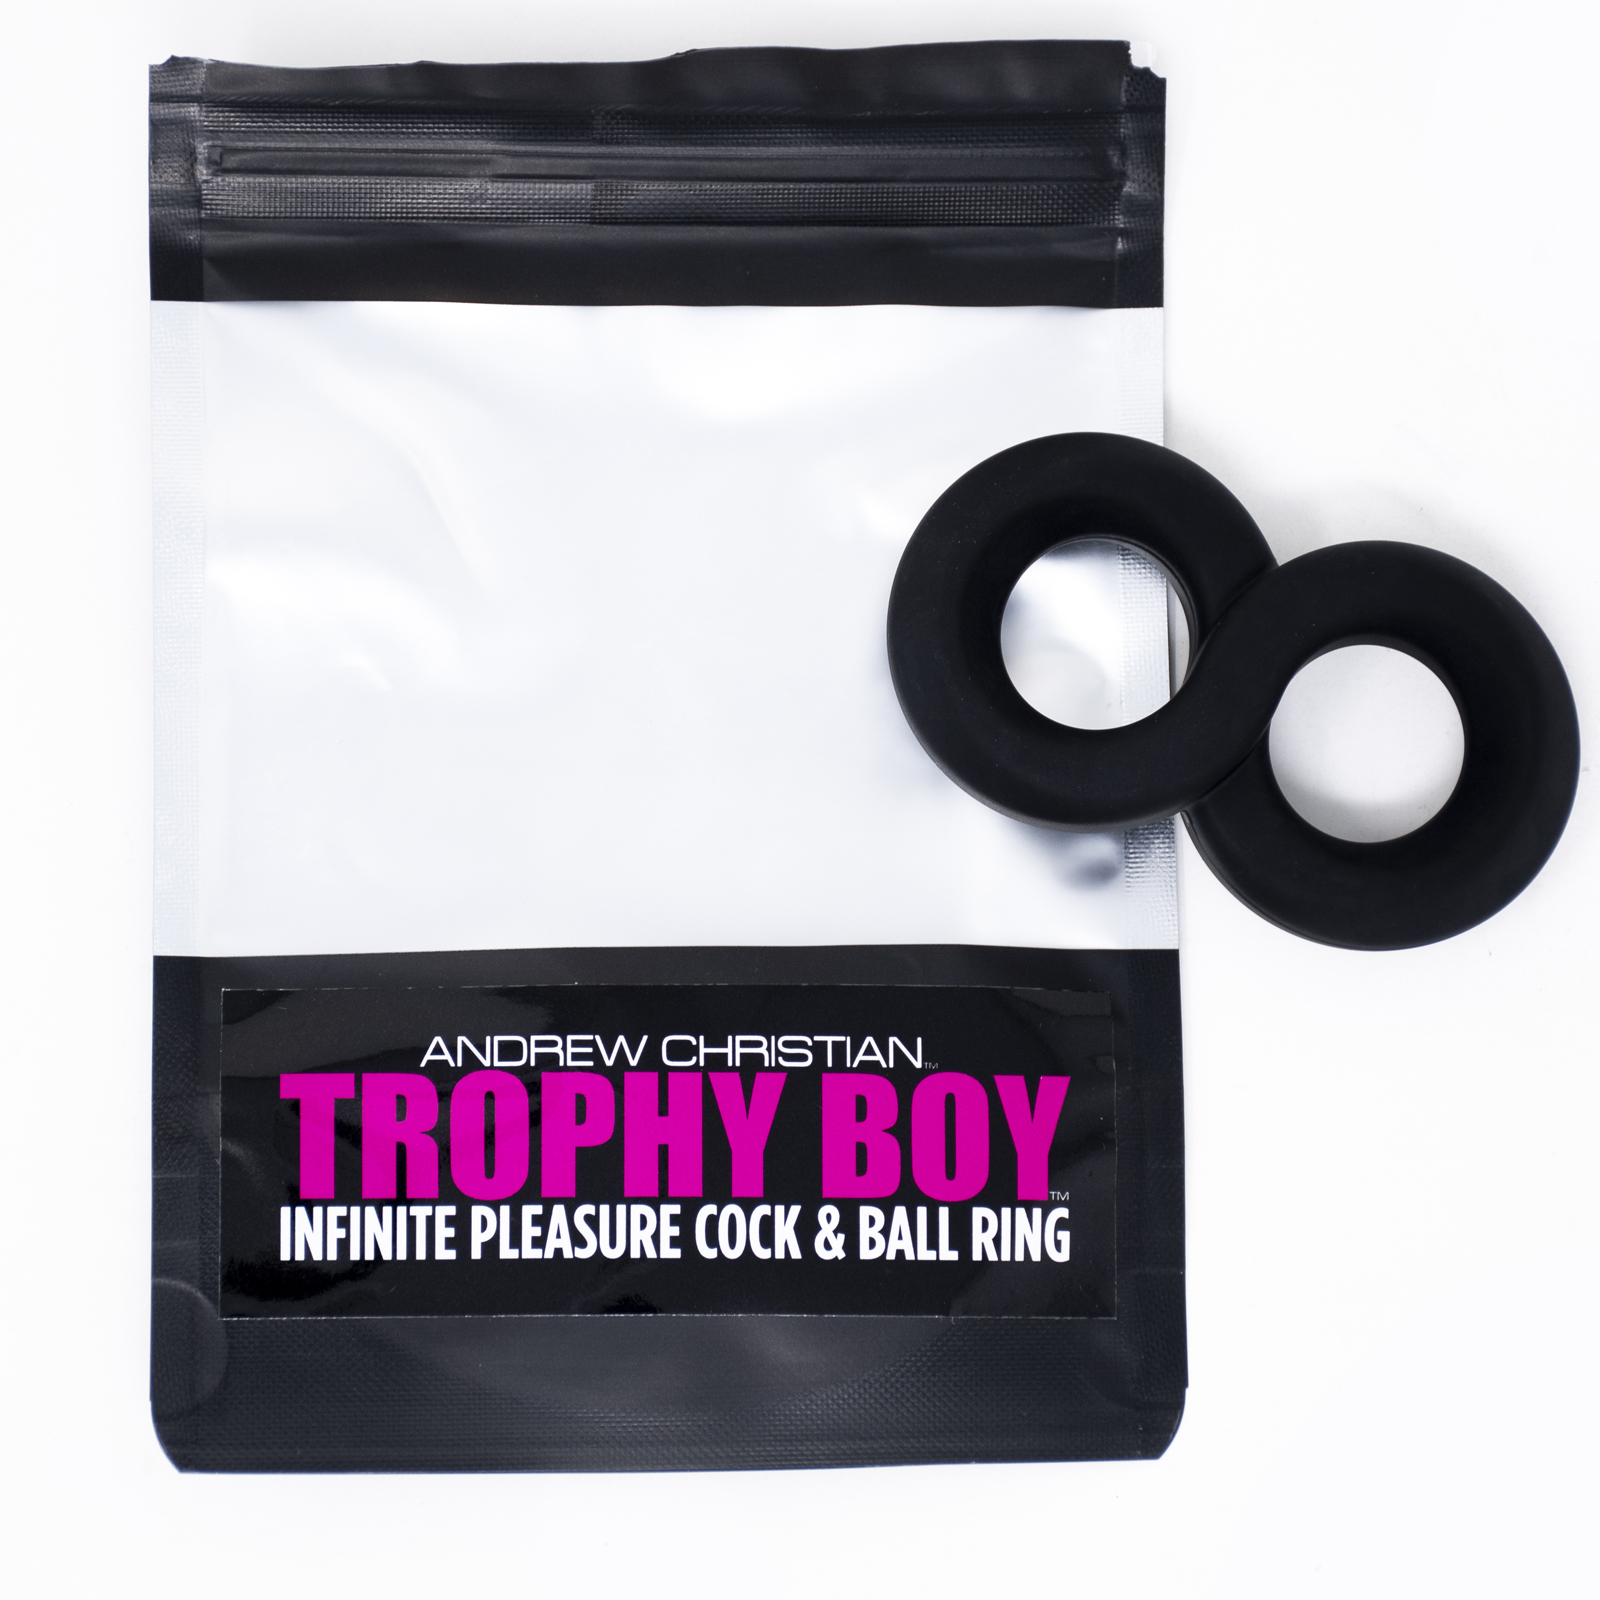 Cockring Andrew Christian Trophy Boy Ininite Pleasure Cock et Ball ring 8498